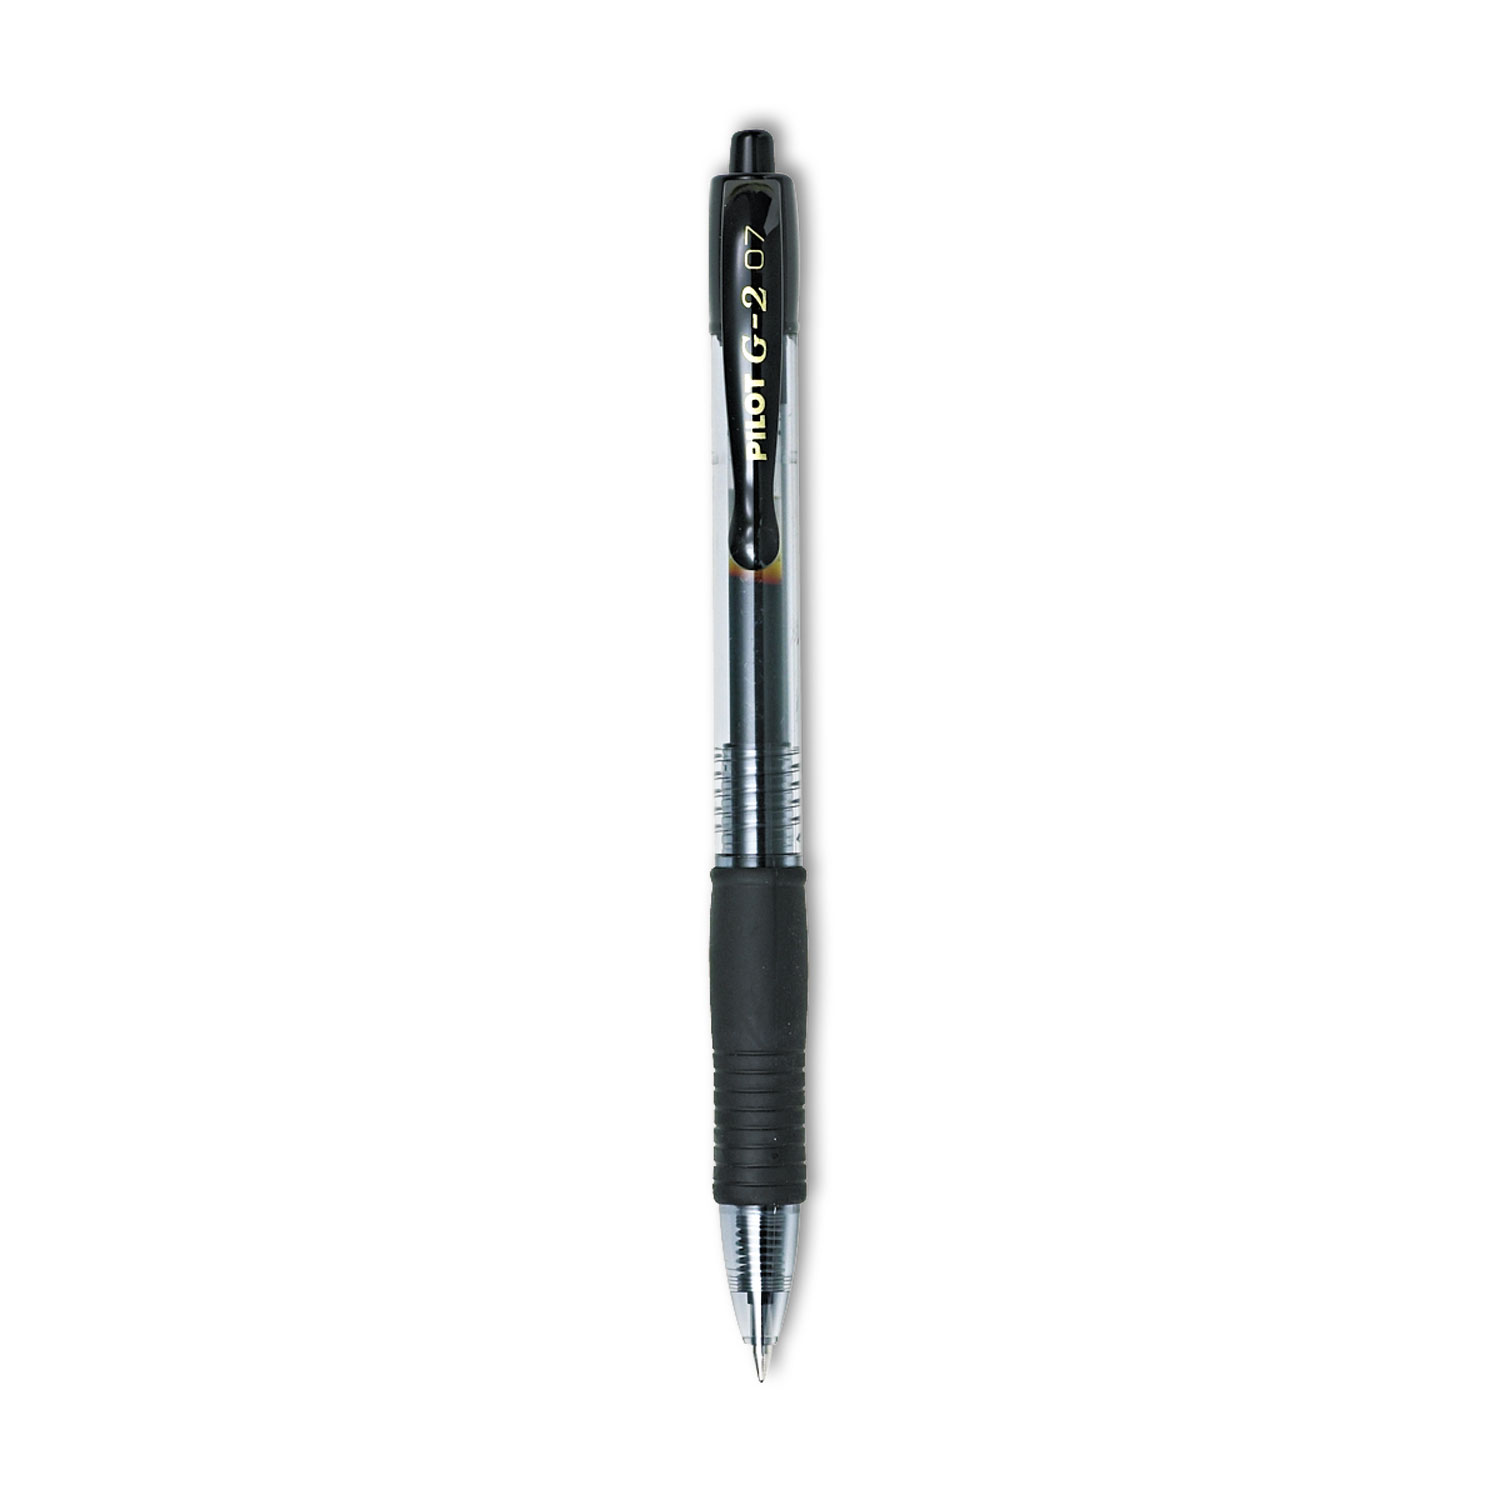 Refill Ink Cartridge for the Lab Pen and Clip Pen